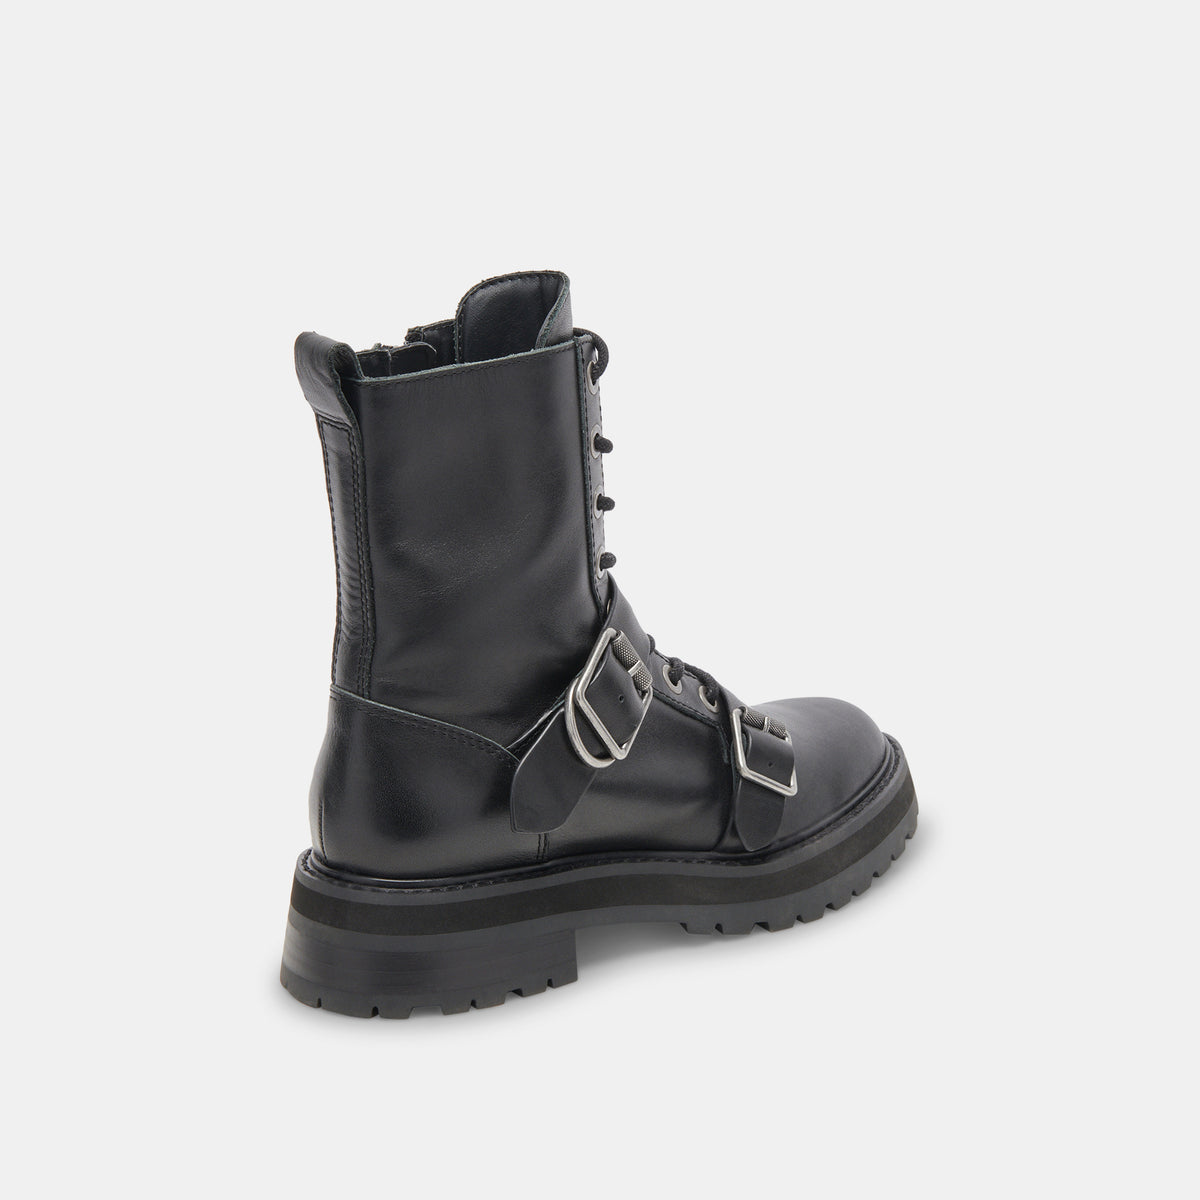 RONSON Boots Black Leather | Women's Black Leather Lug Boots – Dolce Vita